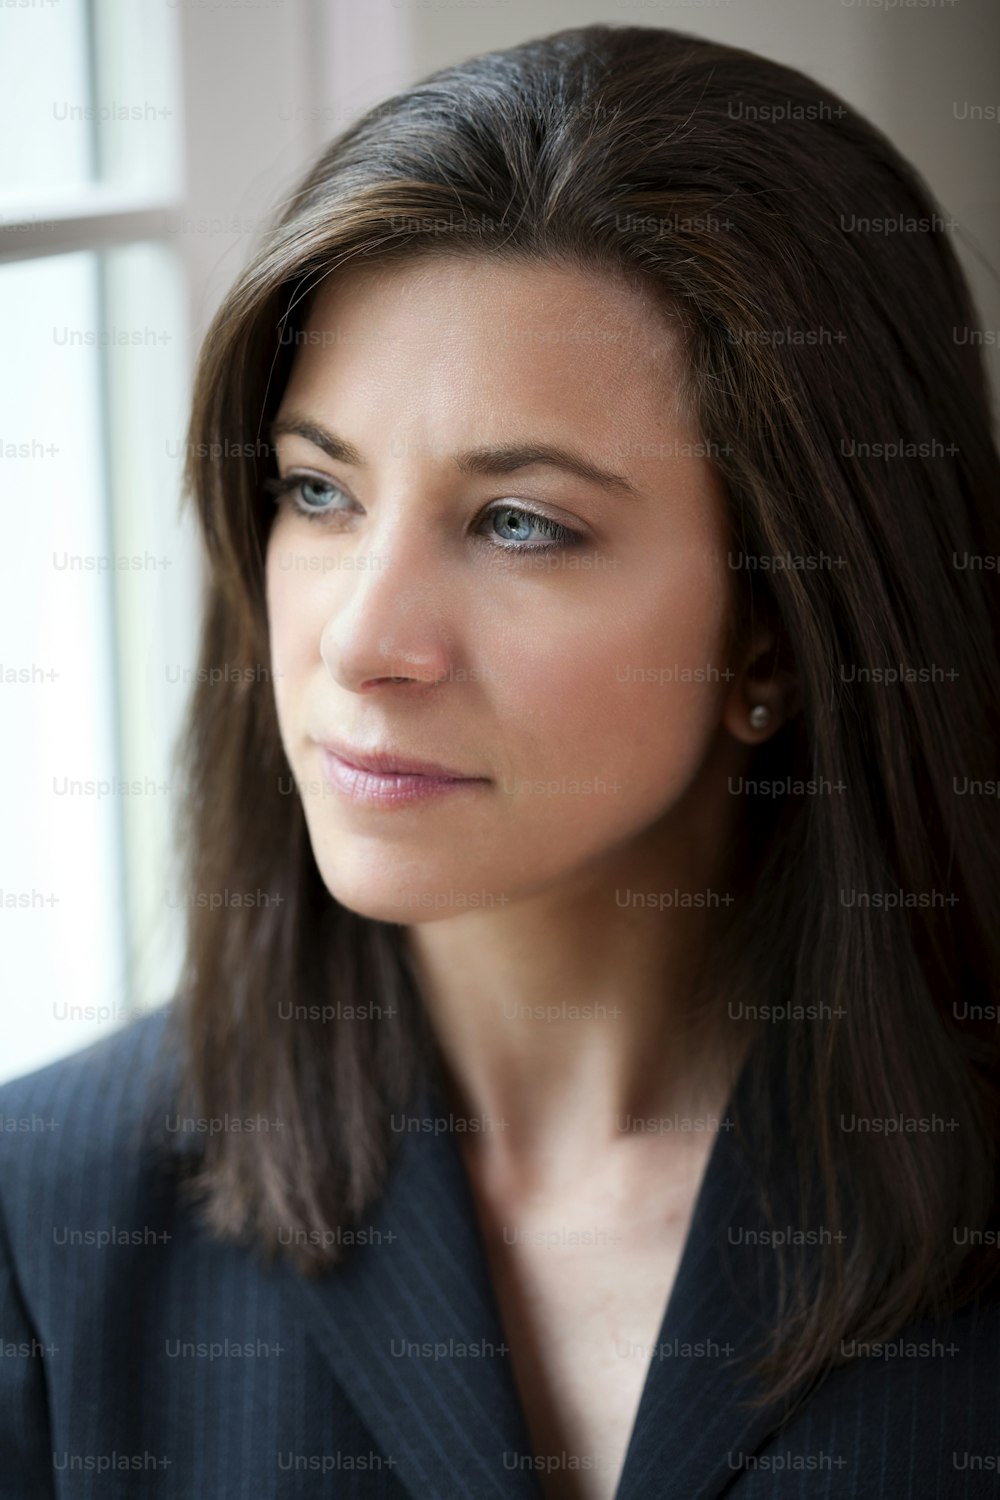 Attractive young woman in suit looking out of window